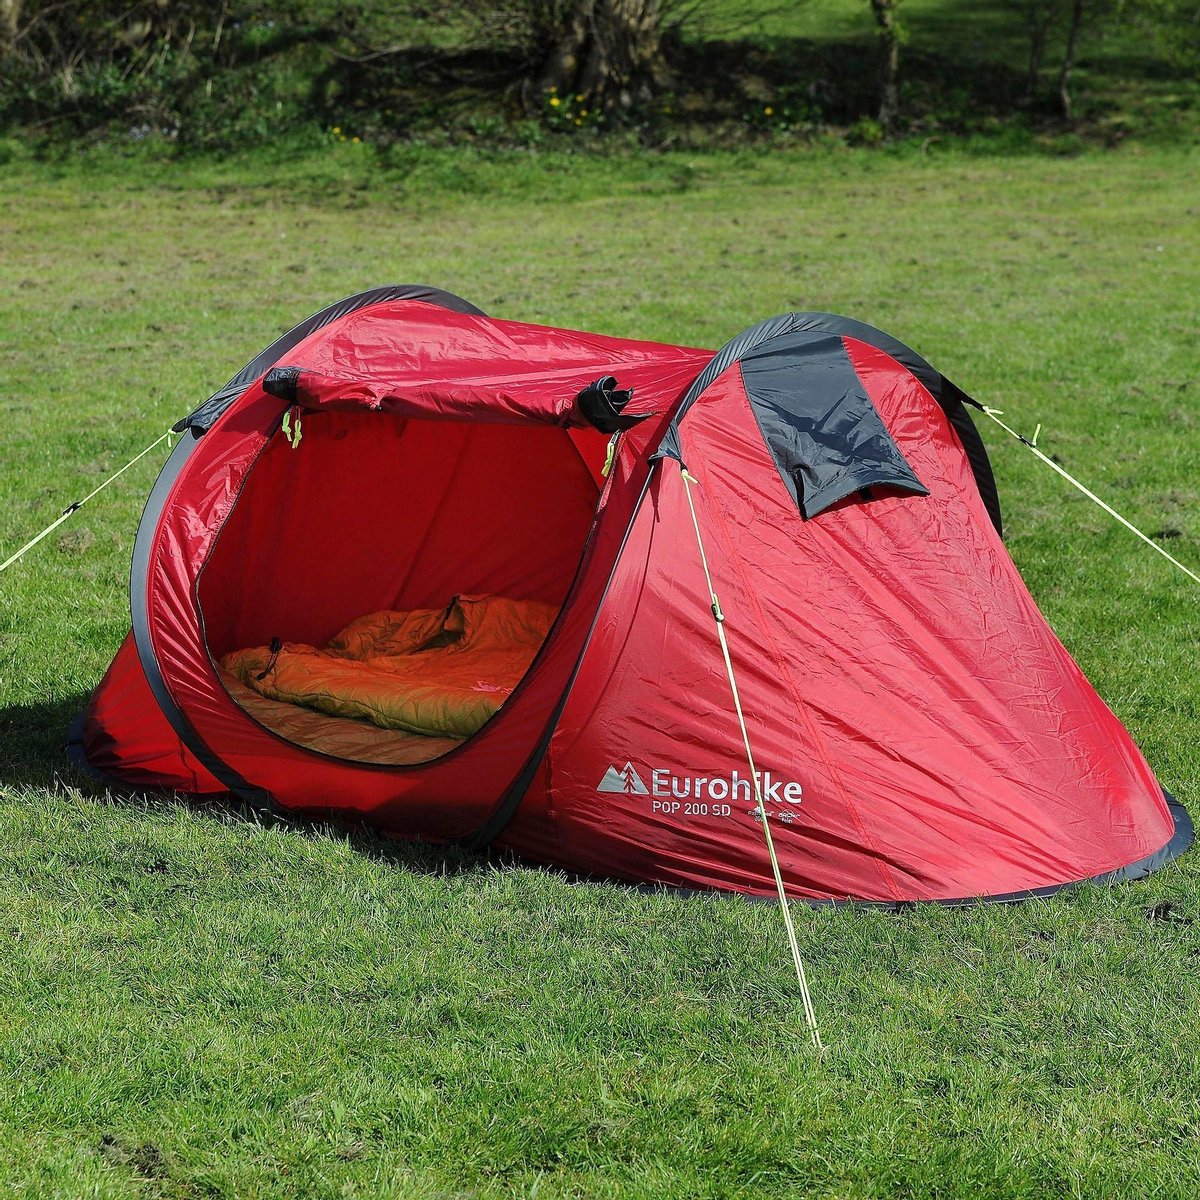 Eurohike Pop-Up 200 Sd 2-Persoons Tent Rood - Maat ONESIZE | bol.com